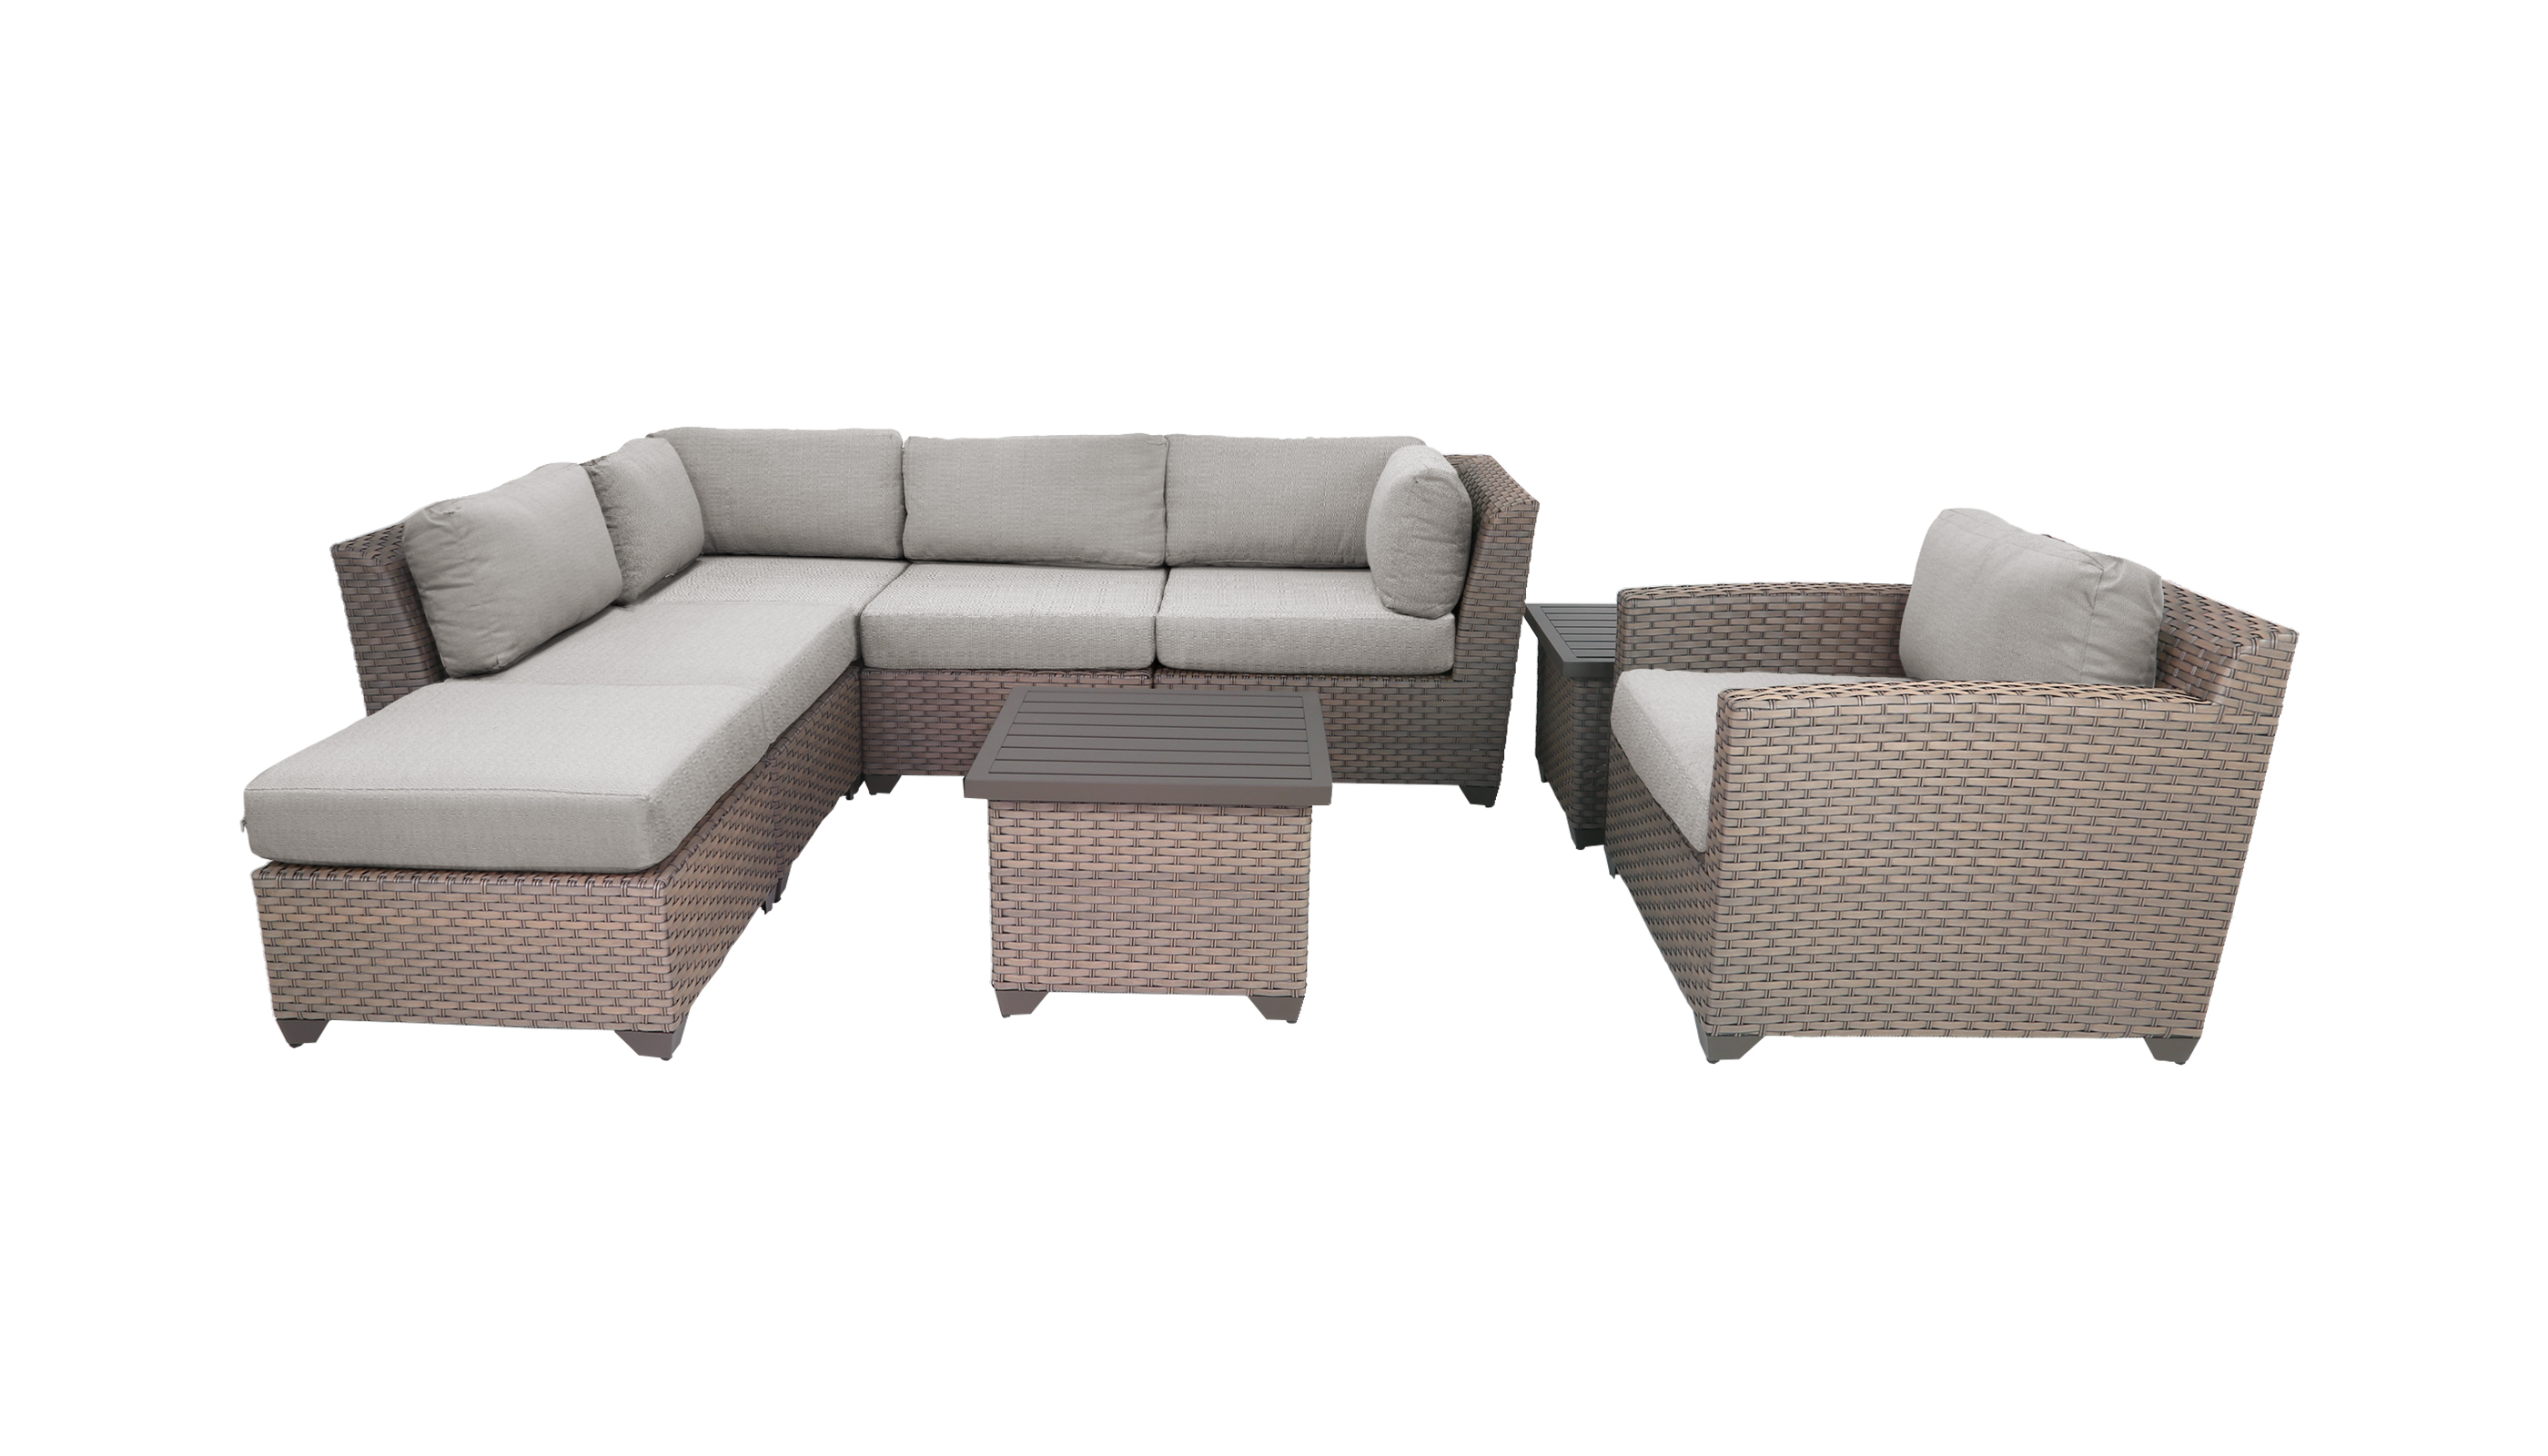 TK Classics Florence Wicker 8 Piece Patio Conversation Set with End Table and 2 Sets of Cushion Covers - image 2 of 11